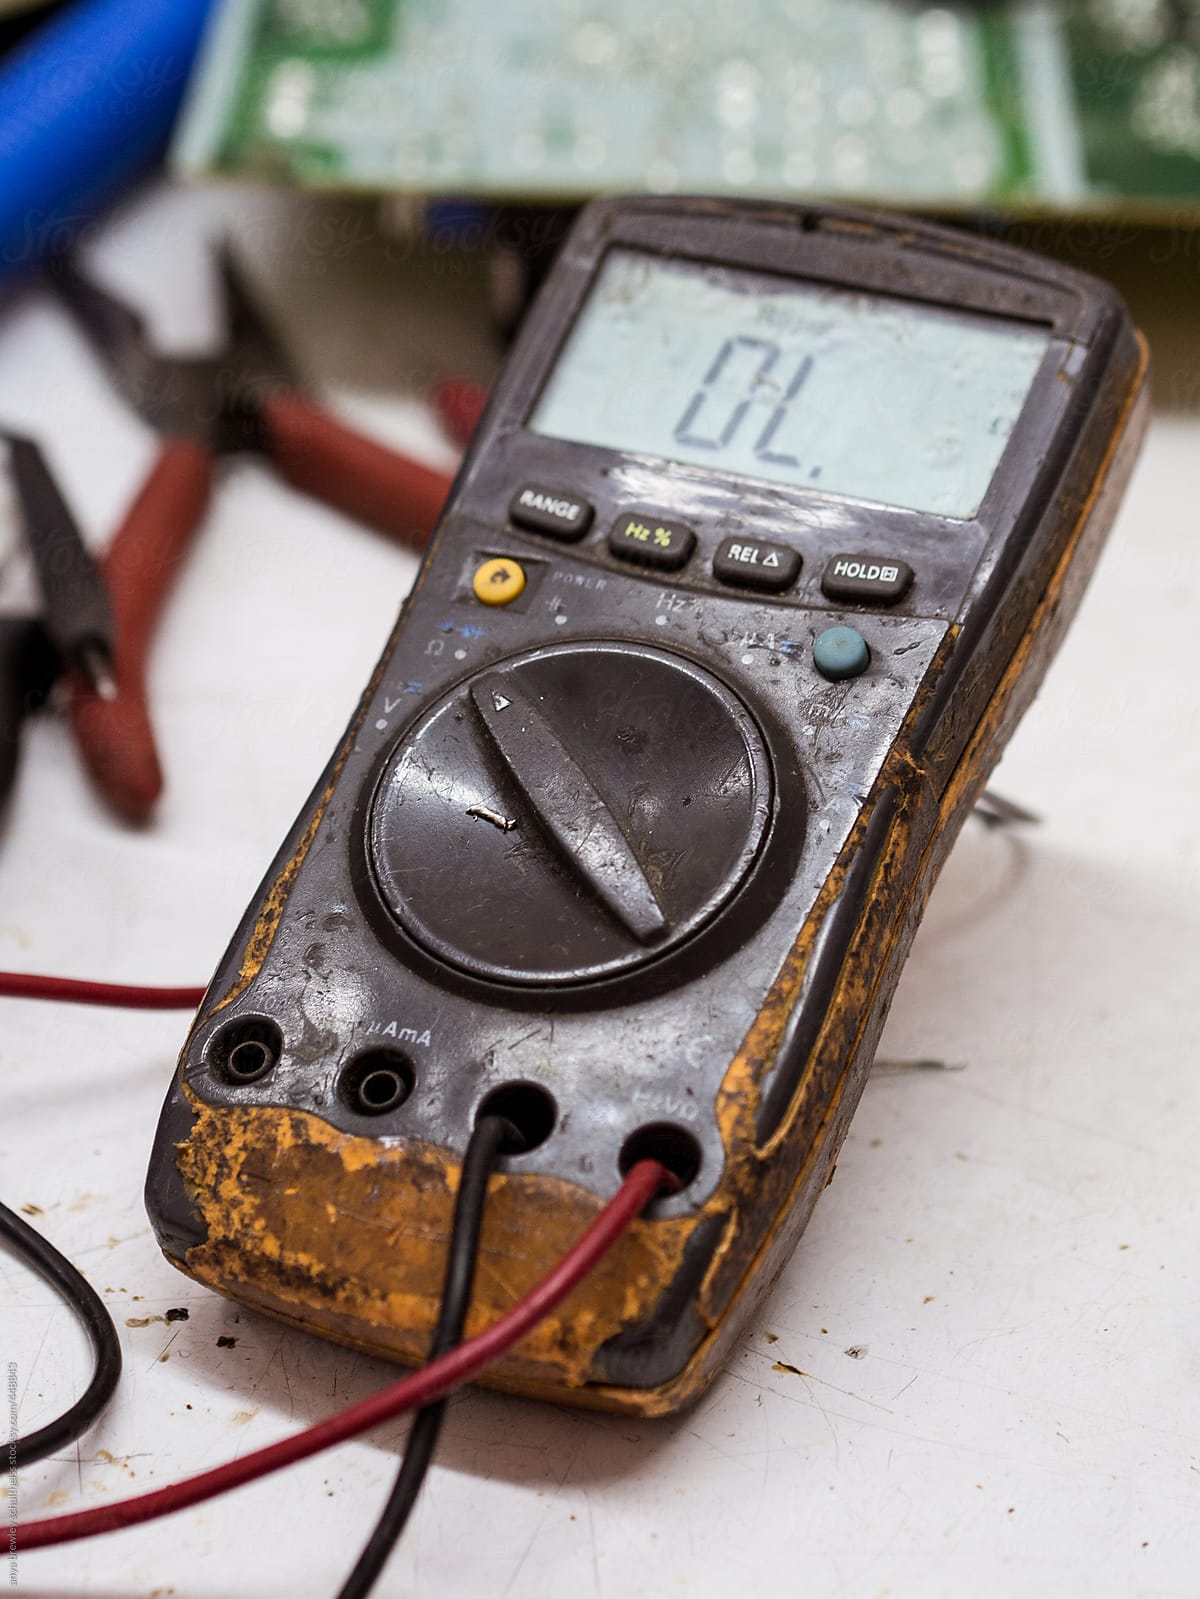 Closeup image of a well used electrical meter